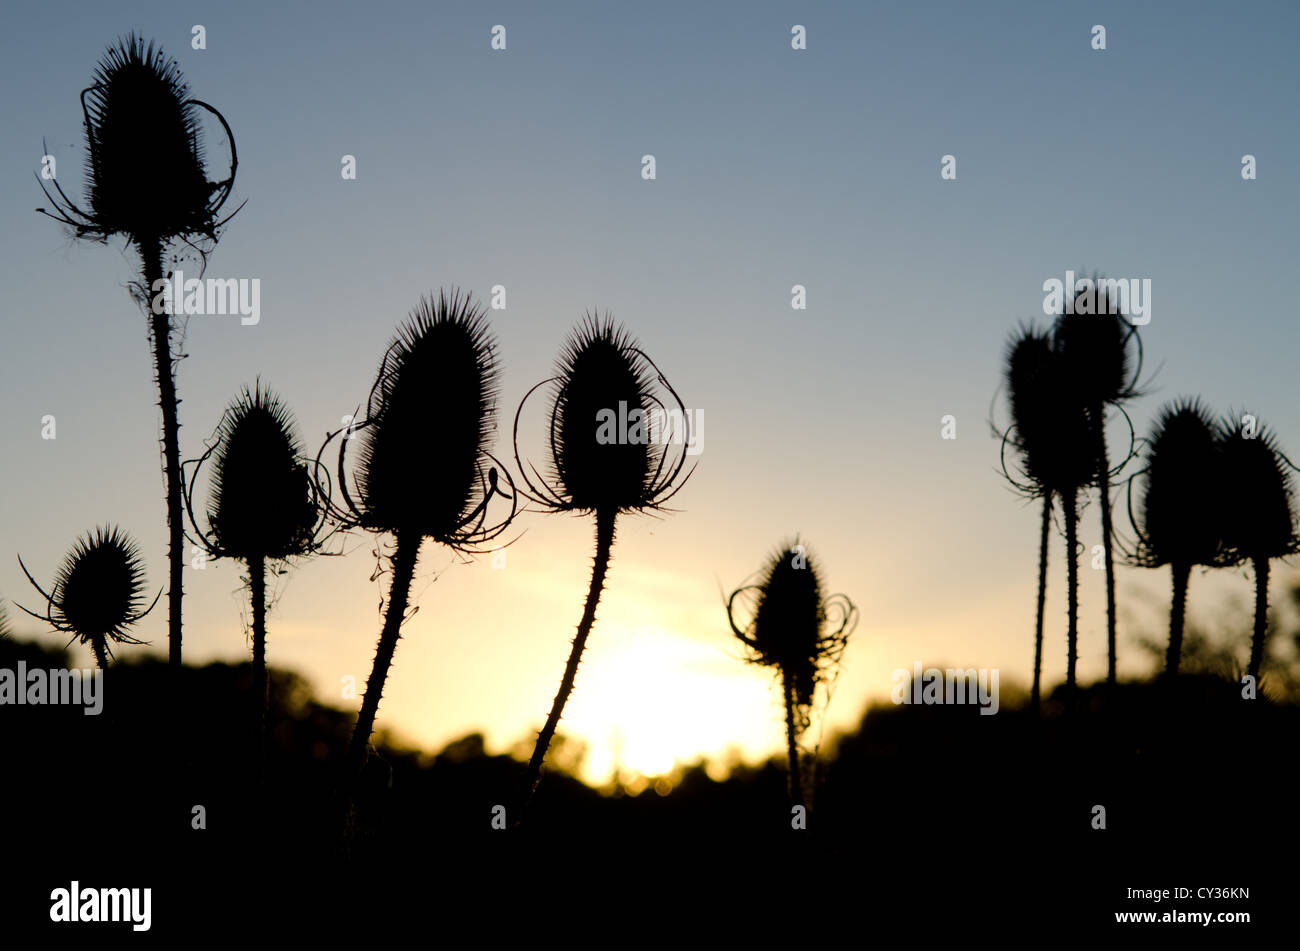 Thistles silhouetted against the sunset, take in Berrington Orchard, Tenbury Wells, Worcestershire. Stock Photo